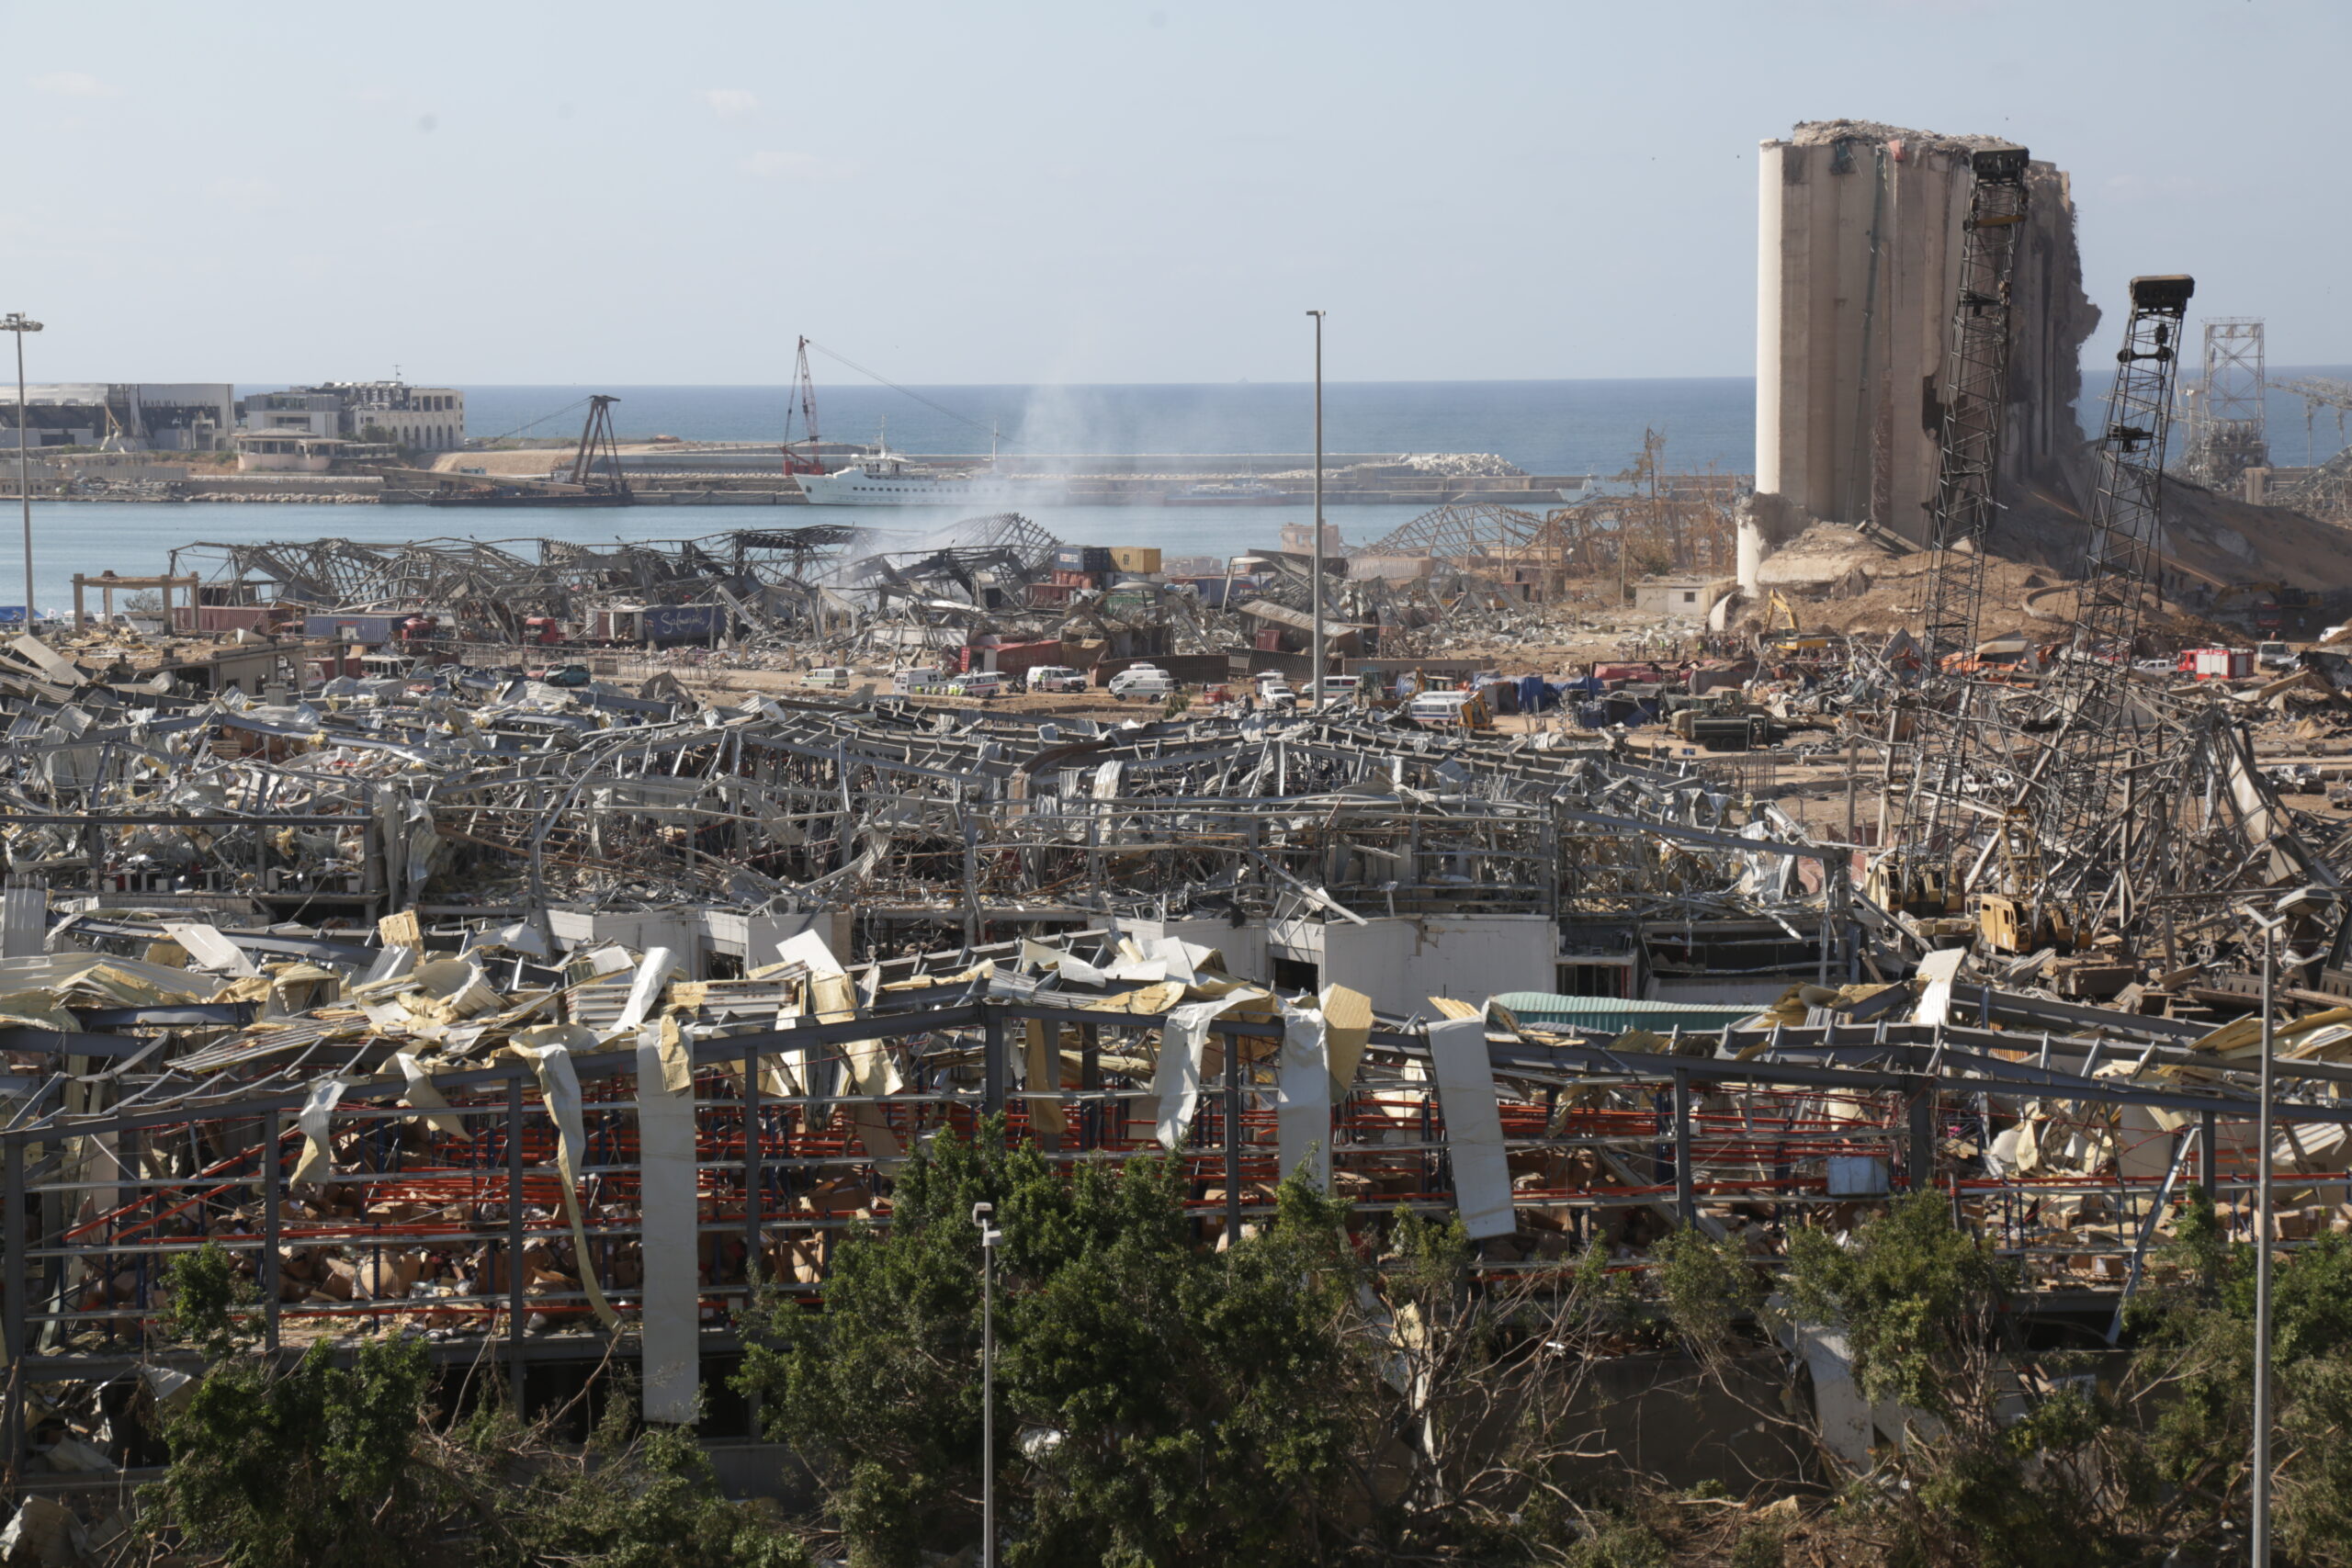 Beirut Blast: Lebanon Remains Gripped by Crisis 3 Years After Port Explosion